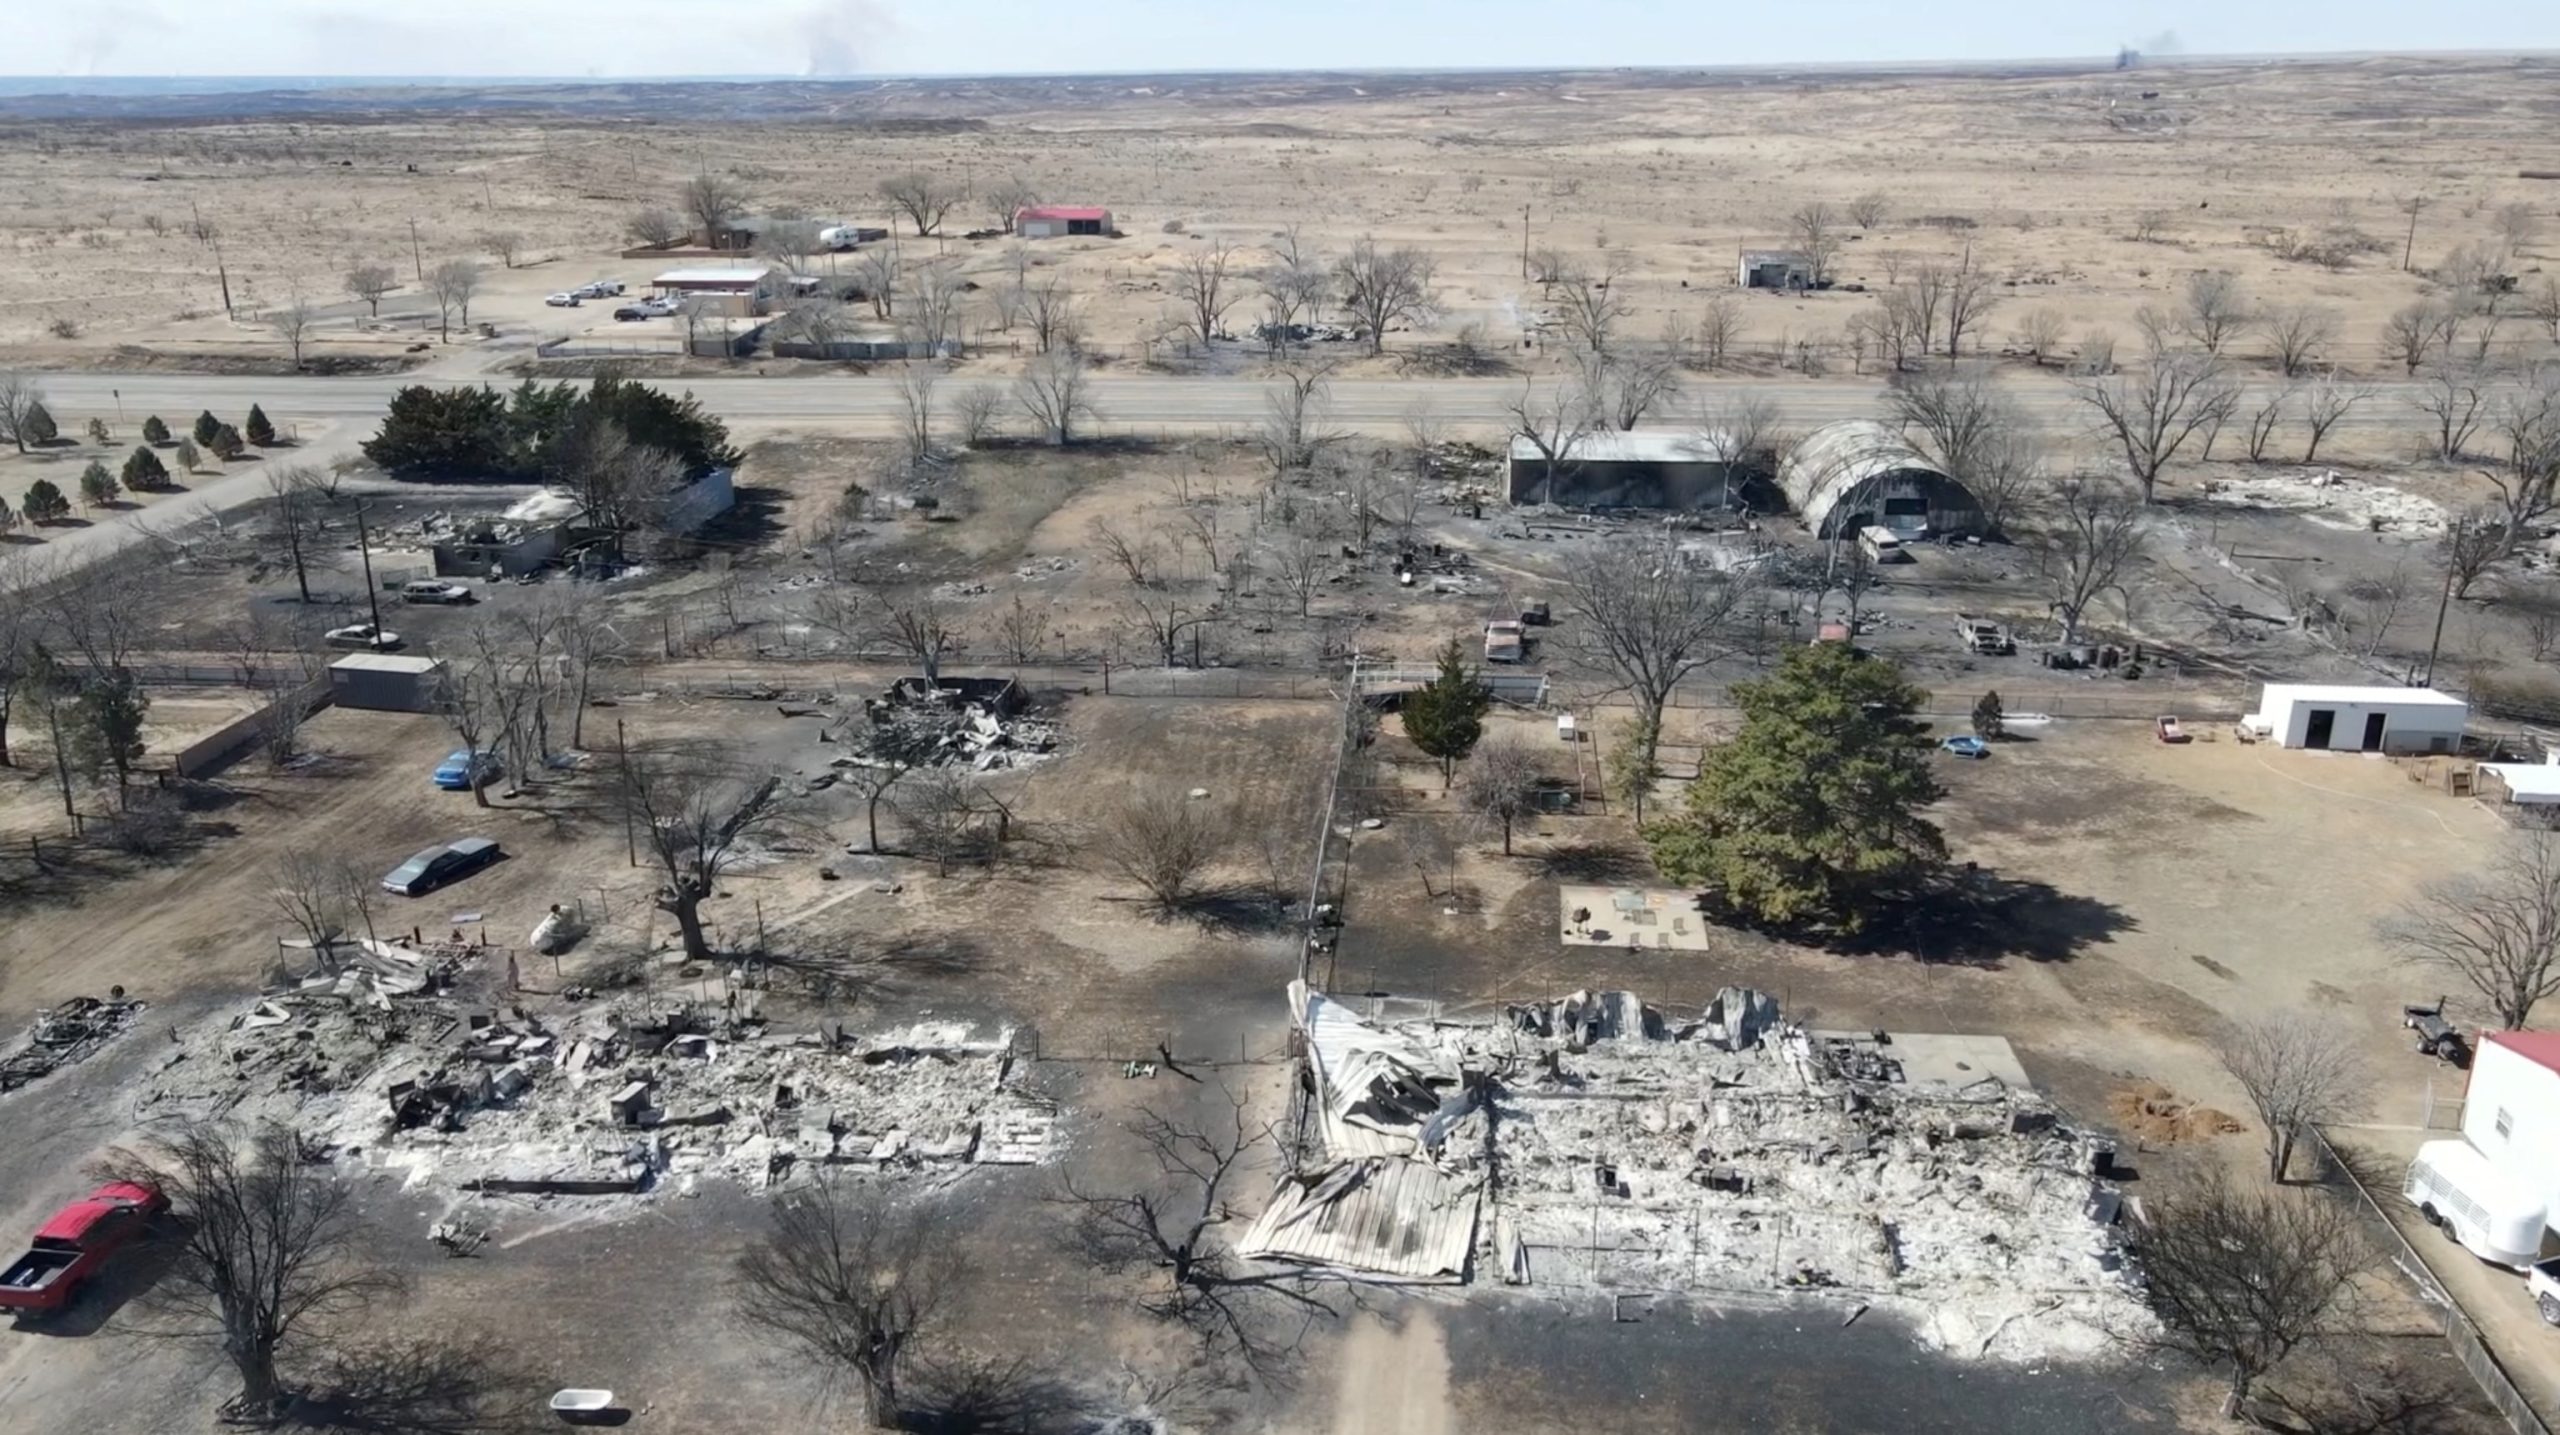 Two fatalities reported in Texas Panhandle as state's largest wildfire continues to spread